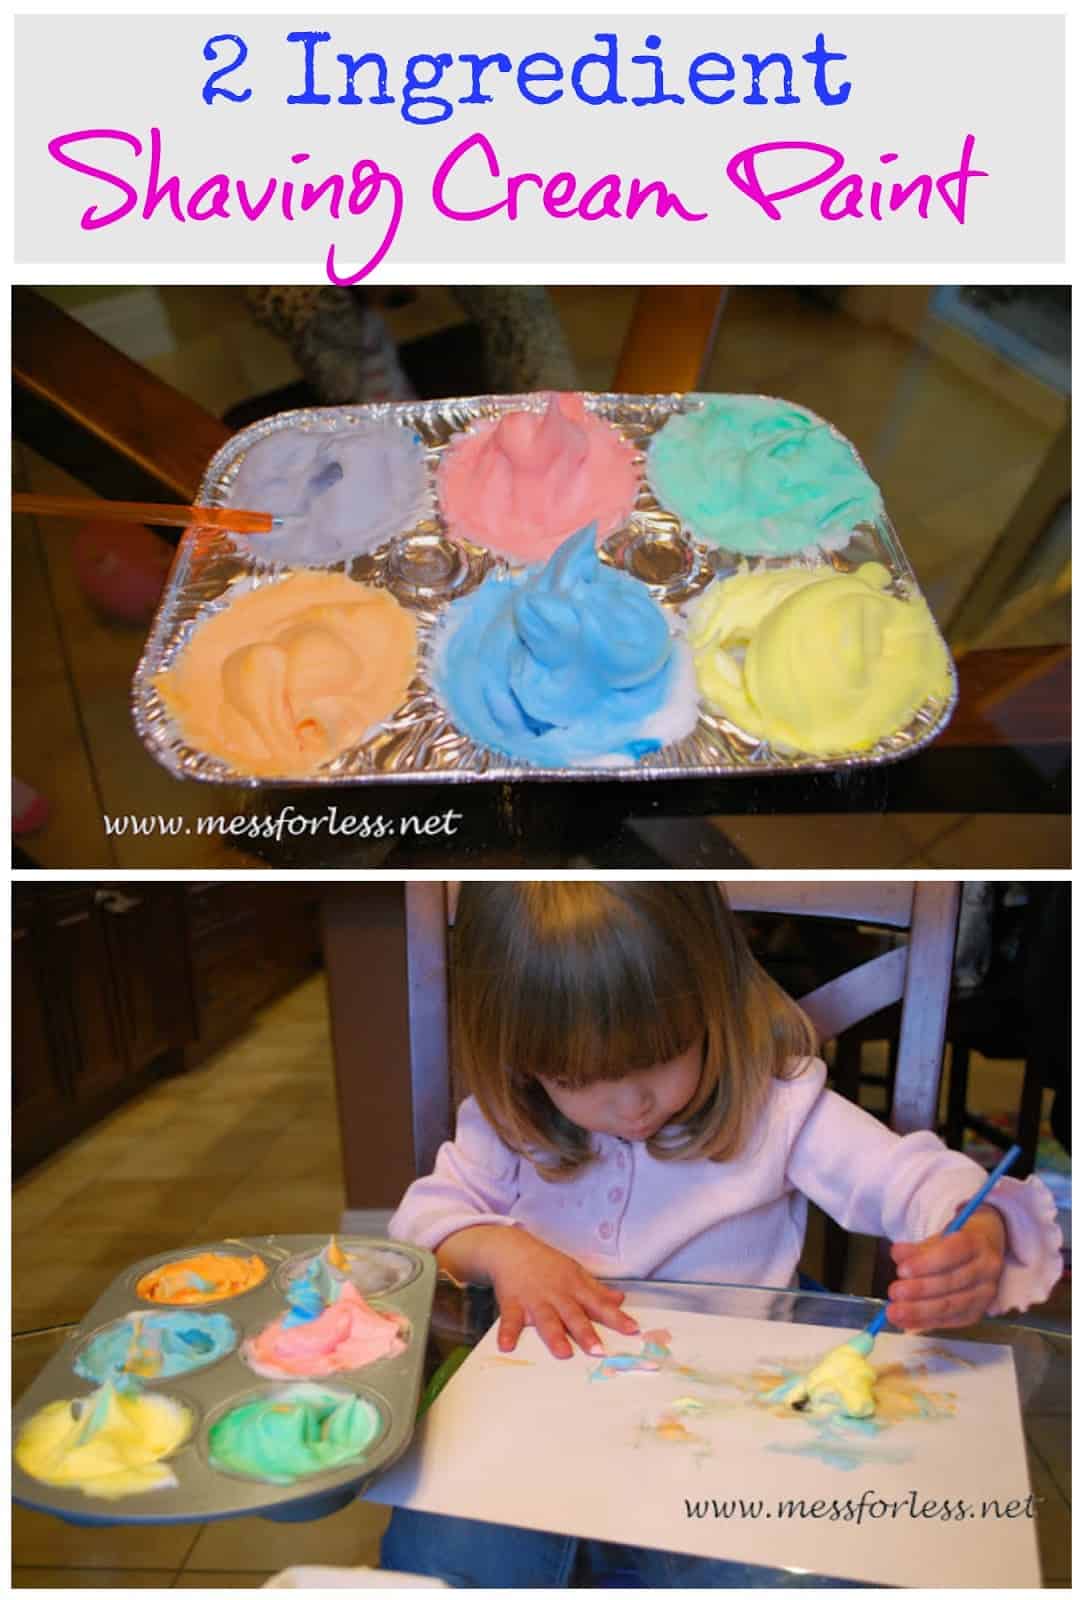 2 Ingredient Shaving Cream Paint - you won't believe how easy this stuff is to make. Such a fun way to paint!